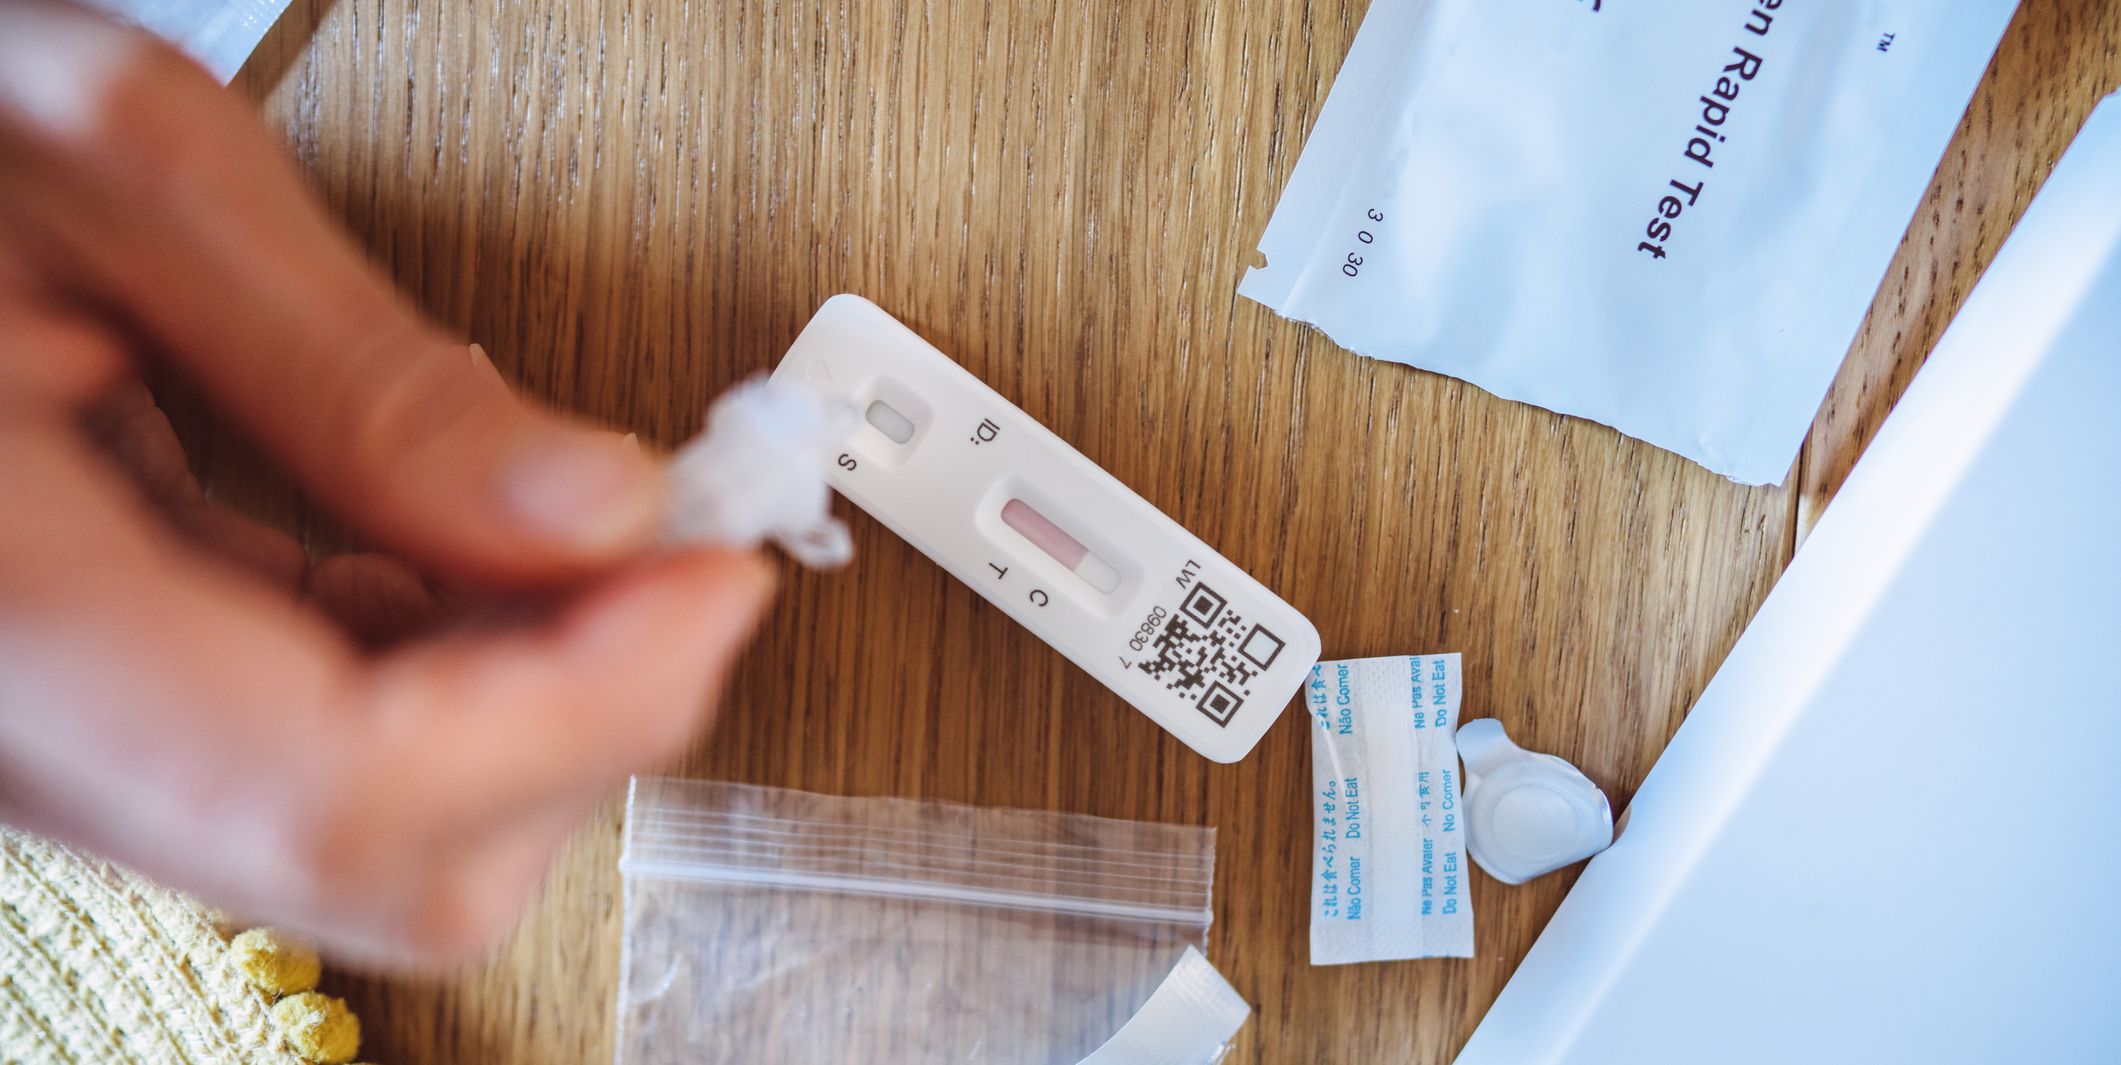 Do Expired COVID Tests Work? Read This Before You Toss Them